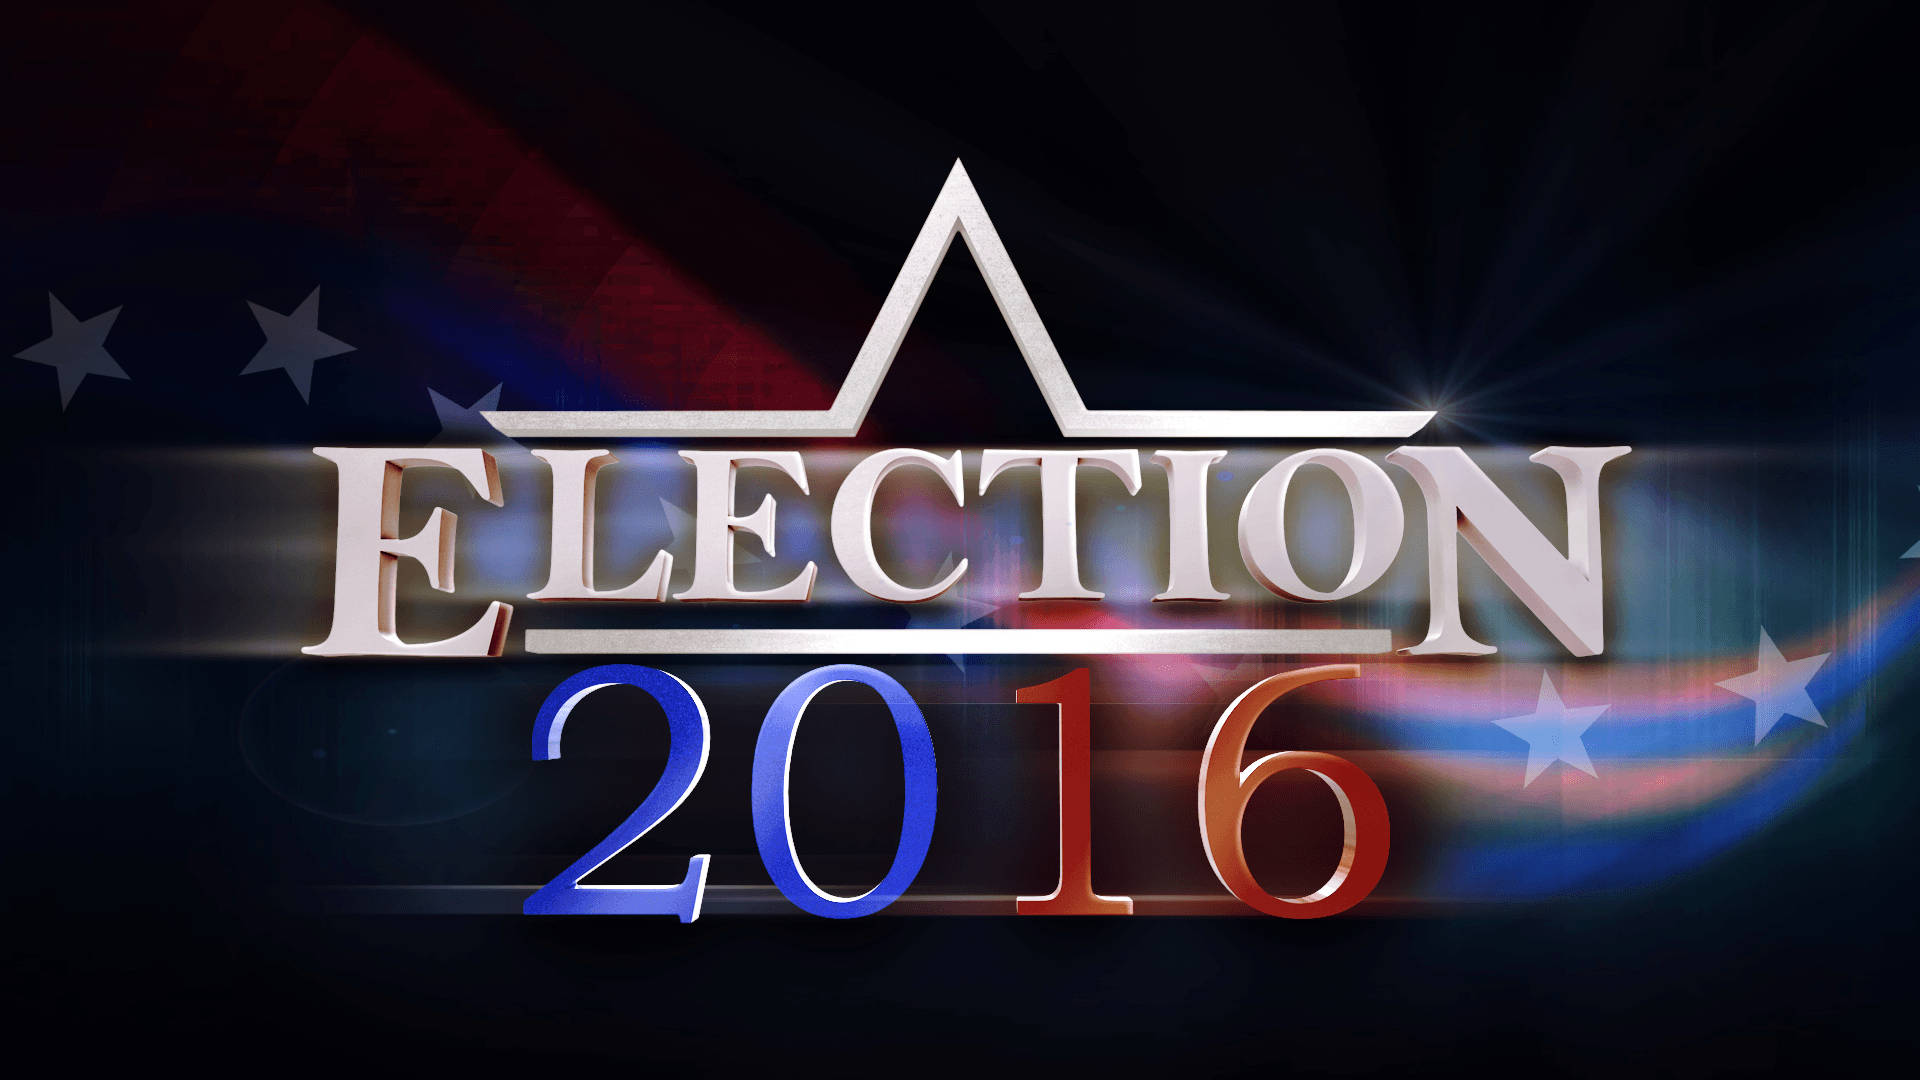 American Election 2016 Poster Background